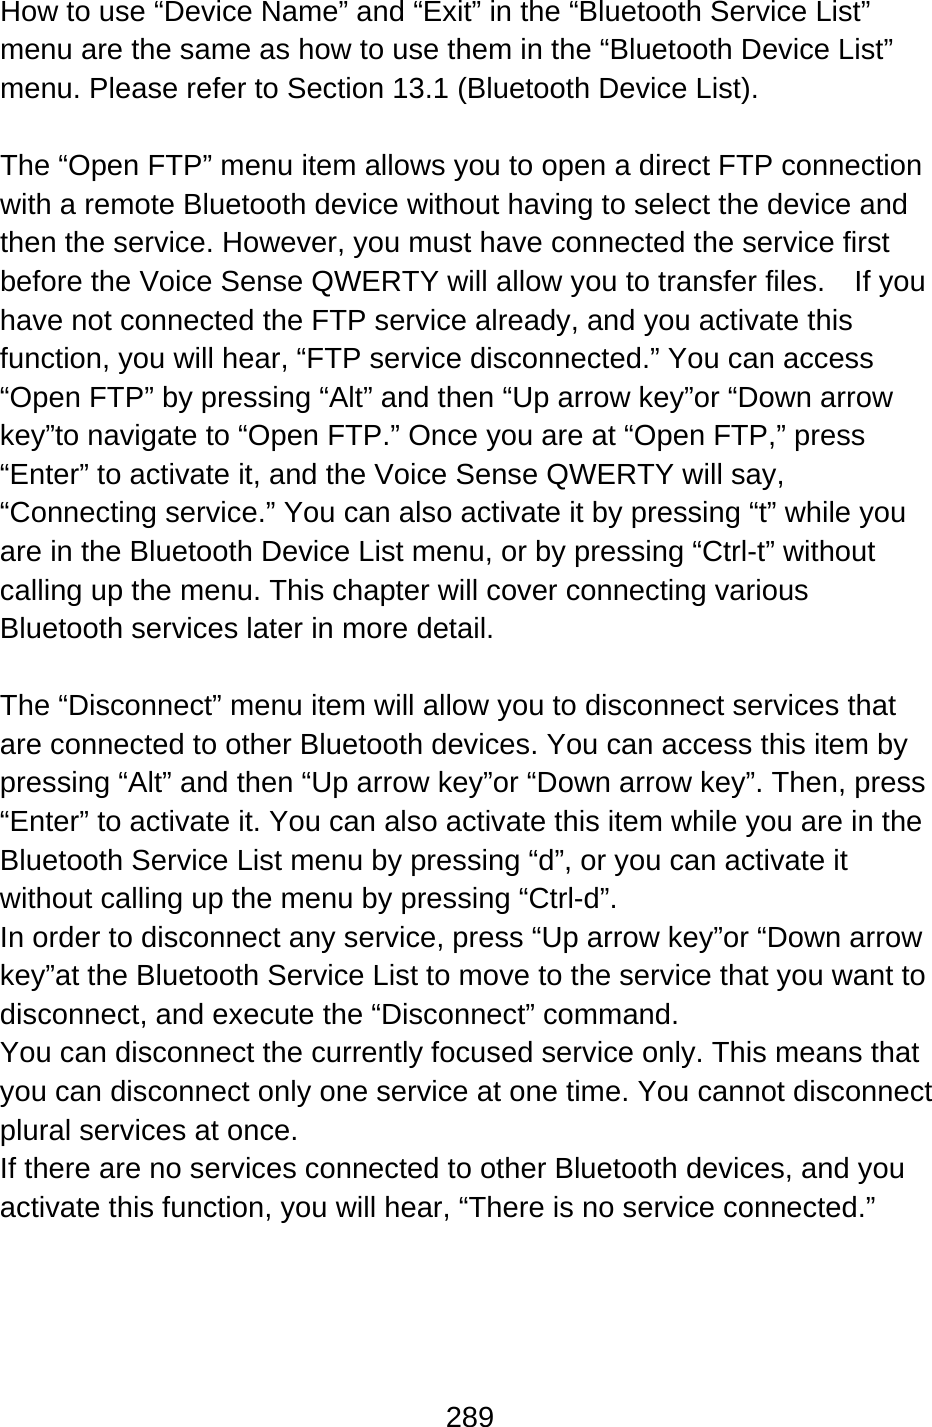 289  How to use “Device Name” and “Exit” in the “Bluetooth Service List” menu are the same as how to use them in the “Bluetooth Device List” menu. Please refer to Section 13.1 (Bluetooth Device List).  The “Open FTP” menu item allows you to open a direct FTP connection with a remote Bluetooth device without having to select the device and then the service. However, you must have connected the service first before the Voice Sense QWERTY will allow you to transfer files.    If you have not connected the FTP service already, and you activate this function, you will hear, “FTP service disconnected.” You can access “Open FTP” by pressing “Alt” and then “Up arrow key”or “Down arrow key”to navigate to “Open FTP.” Once you are at “Open FTP,” press “Enter” to activate it, and the Voice Sense QWERTY will say, “Connecting service.” You can also activate it by pressing “t” while you are in the Bluetooth Device List menu, or by pressing “Ctrl-t” without calling up the menu. This chapter will cover connecting various Bluetooth services later in more detail.  The “Disconnect” menu item will allow you to disconnect services that are connected to other Bluetooth devices. You can access this item by pressing “Alt” and then “Up arrow key”or “Down arrow key”. Then, press “Enter” to activate it. You can also activate this item while you are in the Bluetooth Service List menu by pressing “d”, or you can activate it without calling up the menu by pressing “Ctrl-d”. In order to disconnect any service, press “Up arrow key”or “Down arrow key”at the Bluetooth Service List to move to the service that you want to disconnect, and execute the “Disconnect” command. You can disconnect the currently focused service only. This means that you can disconnect only one service at one time. You cannot disconnect plural services at once. If there are no services connected to other Bluetooth devices, and you activate this function, you will hear, “There is no service connected.”    